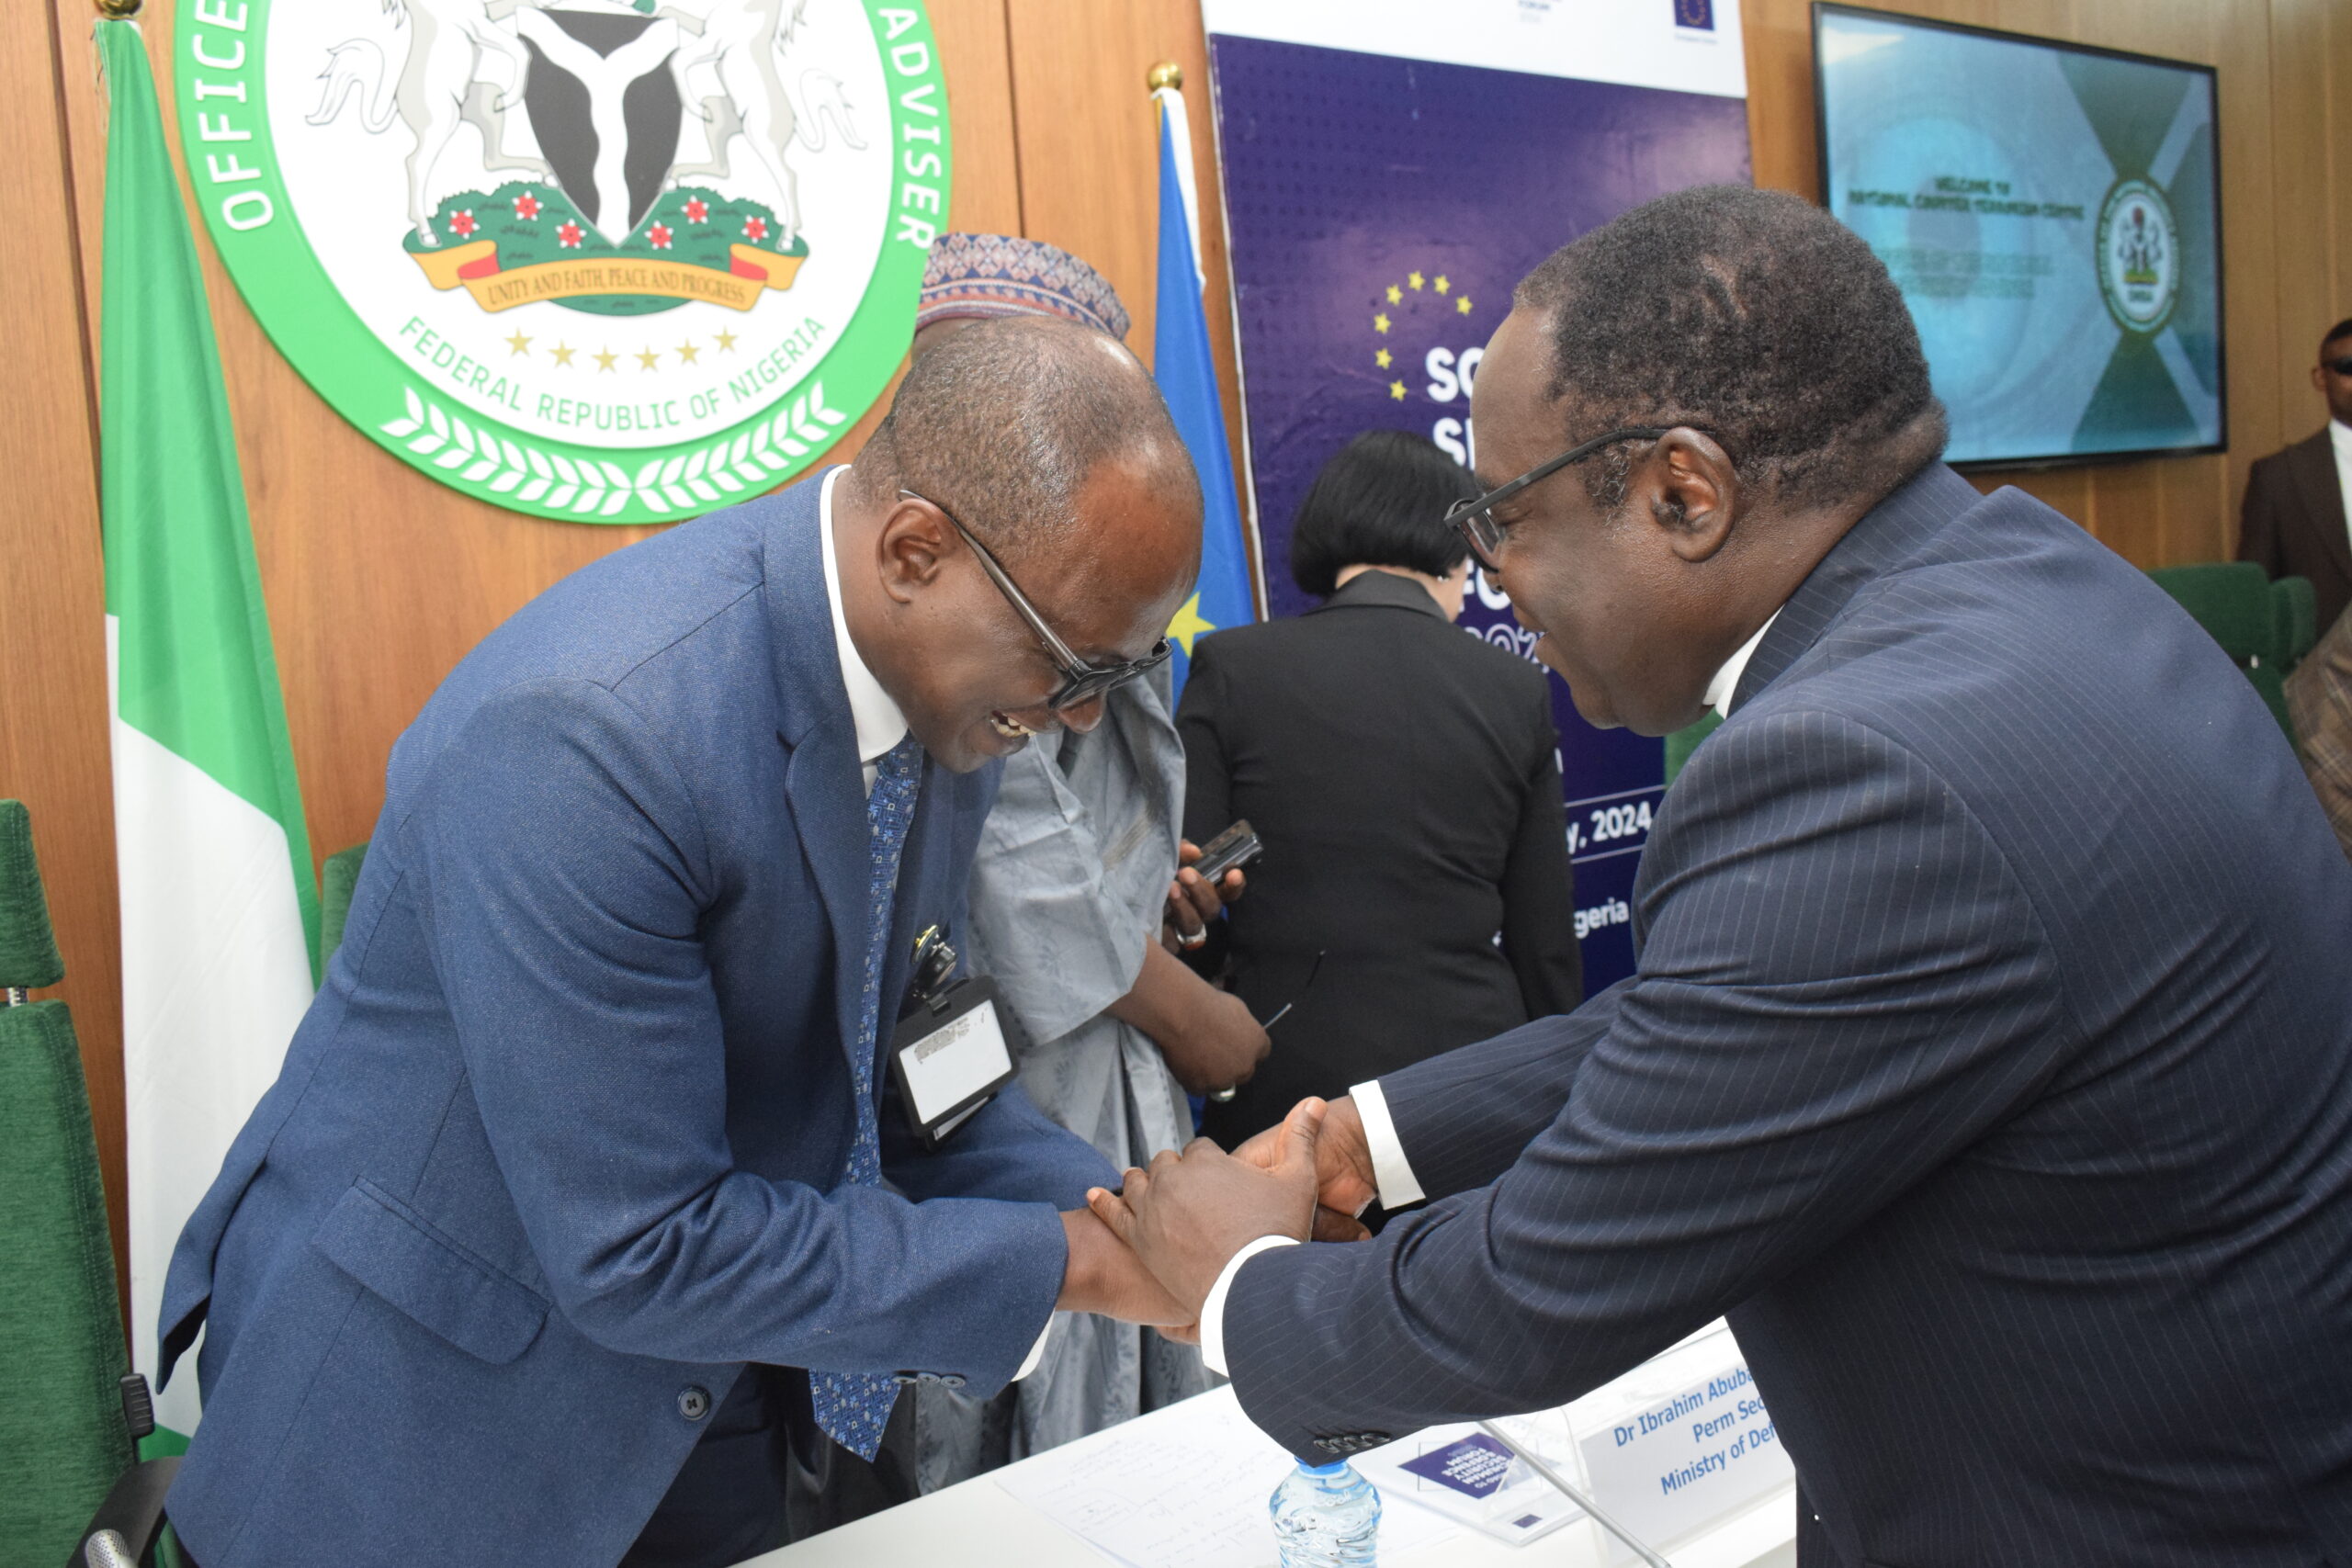 National Coordinator, NCTC, Maj. Gen. AG Laka in a handshake with Bishop Matthew Hassan Kukah of Catholic Diocese of Sokoto at the event